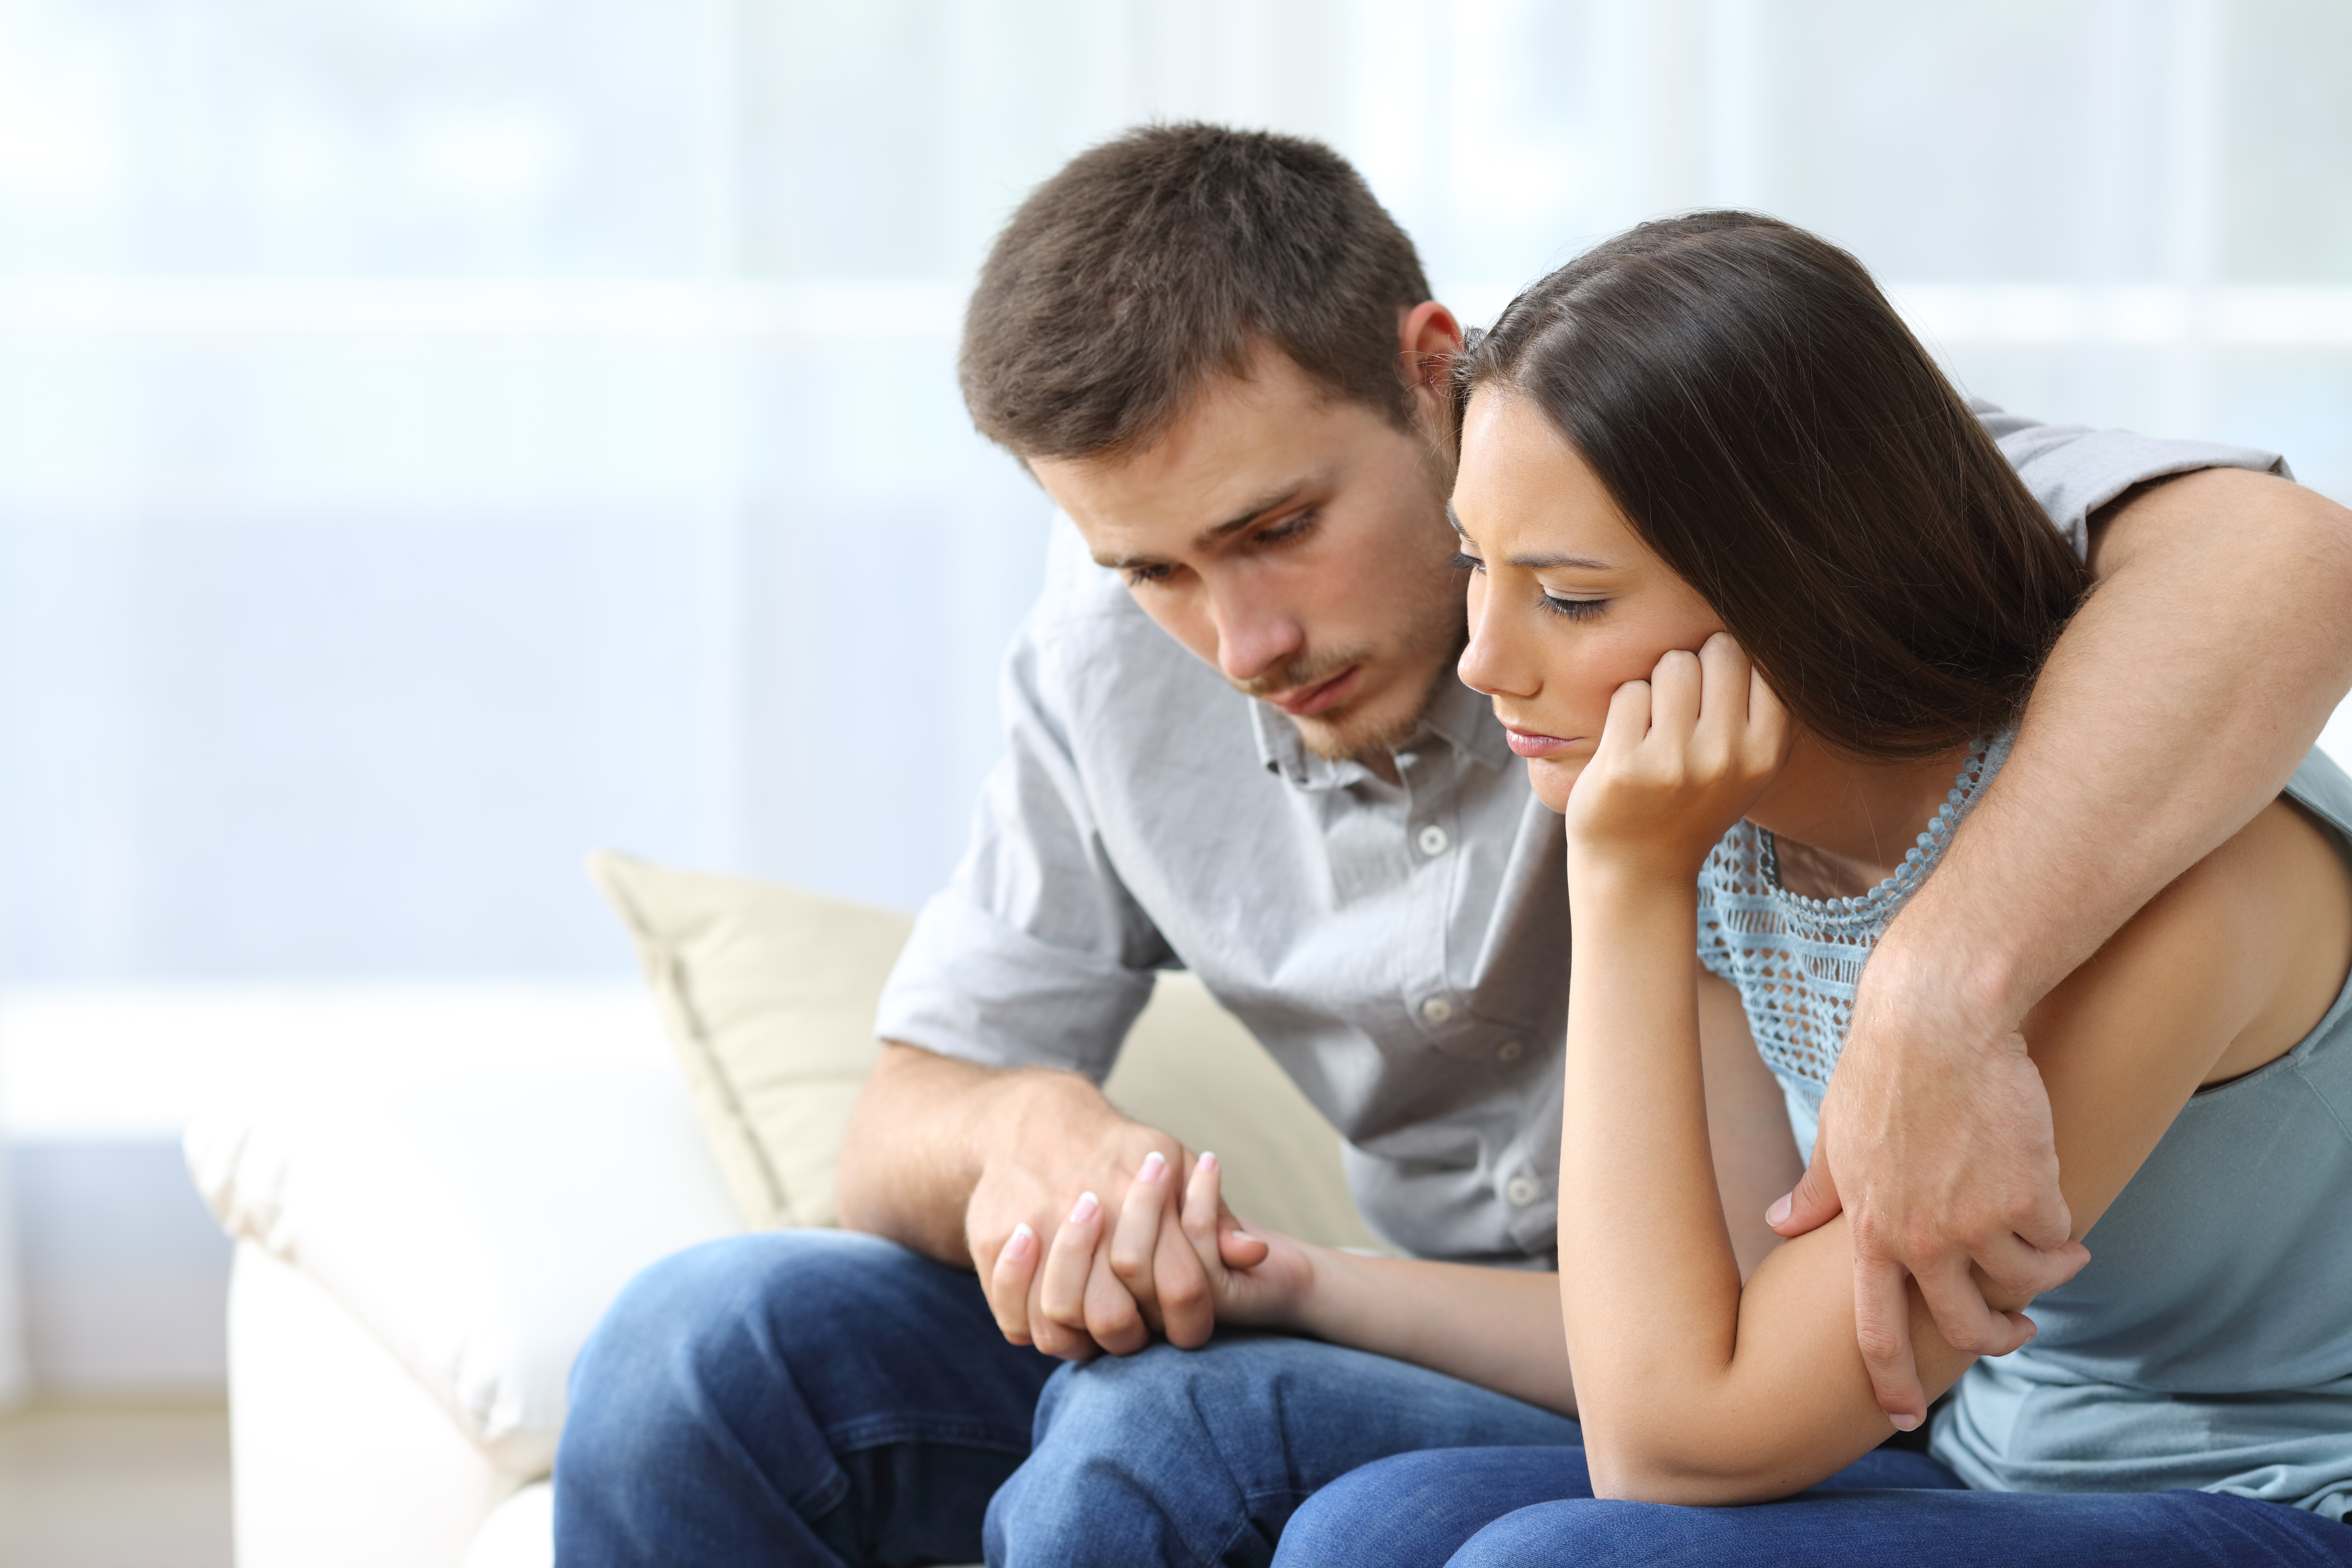 A sad couple comforting each other | Source: Shutterstock